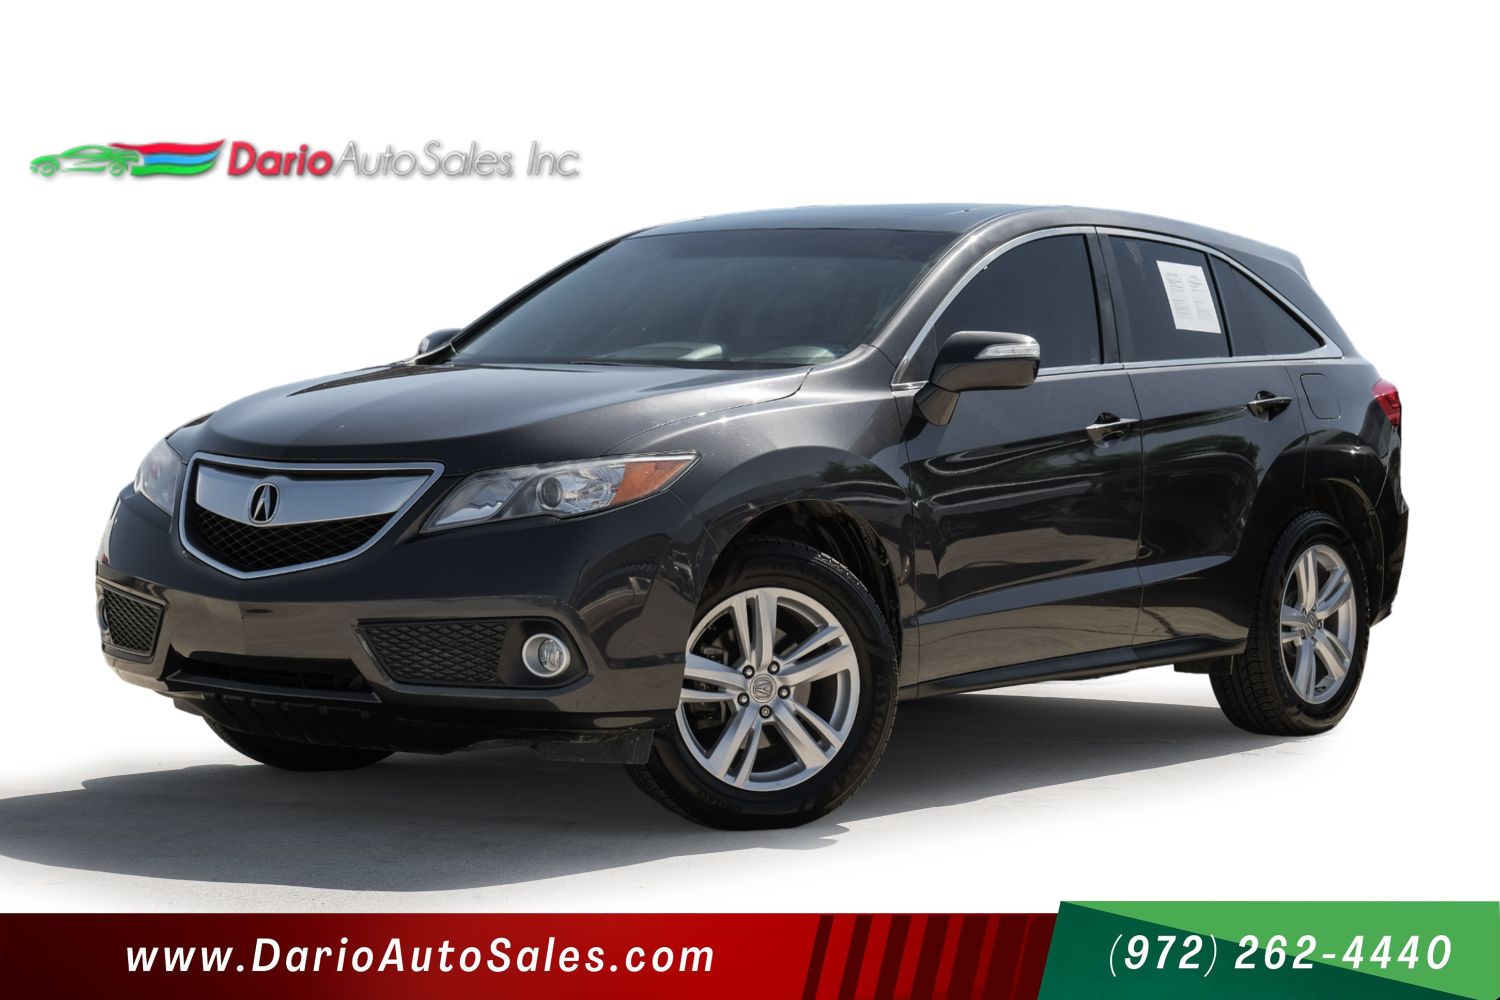 2014 Acura RDX 6-Spd AT w/ Technology Package 1